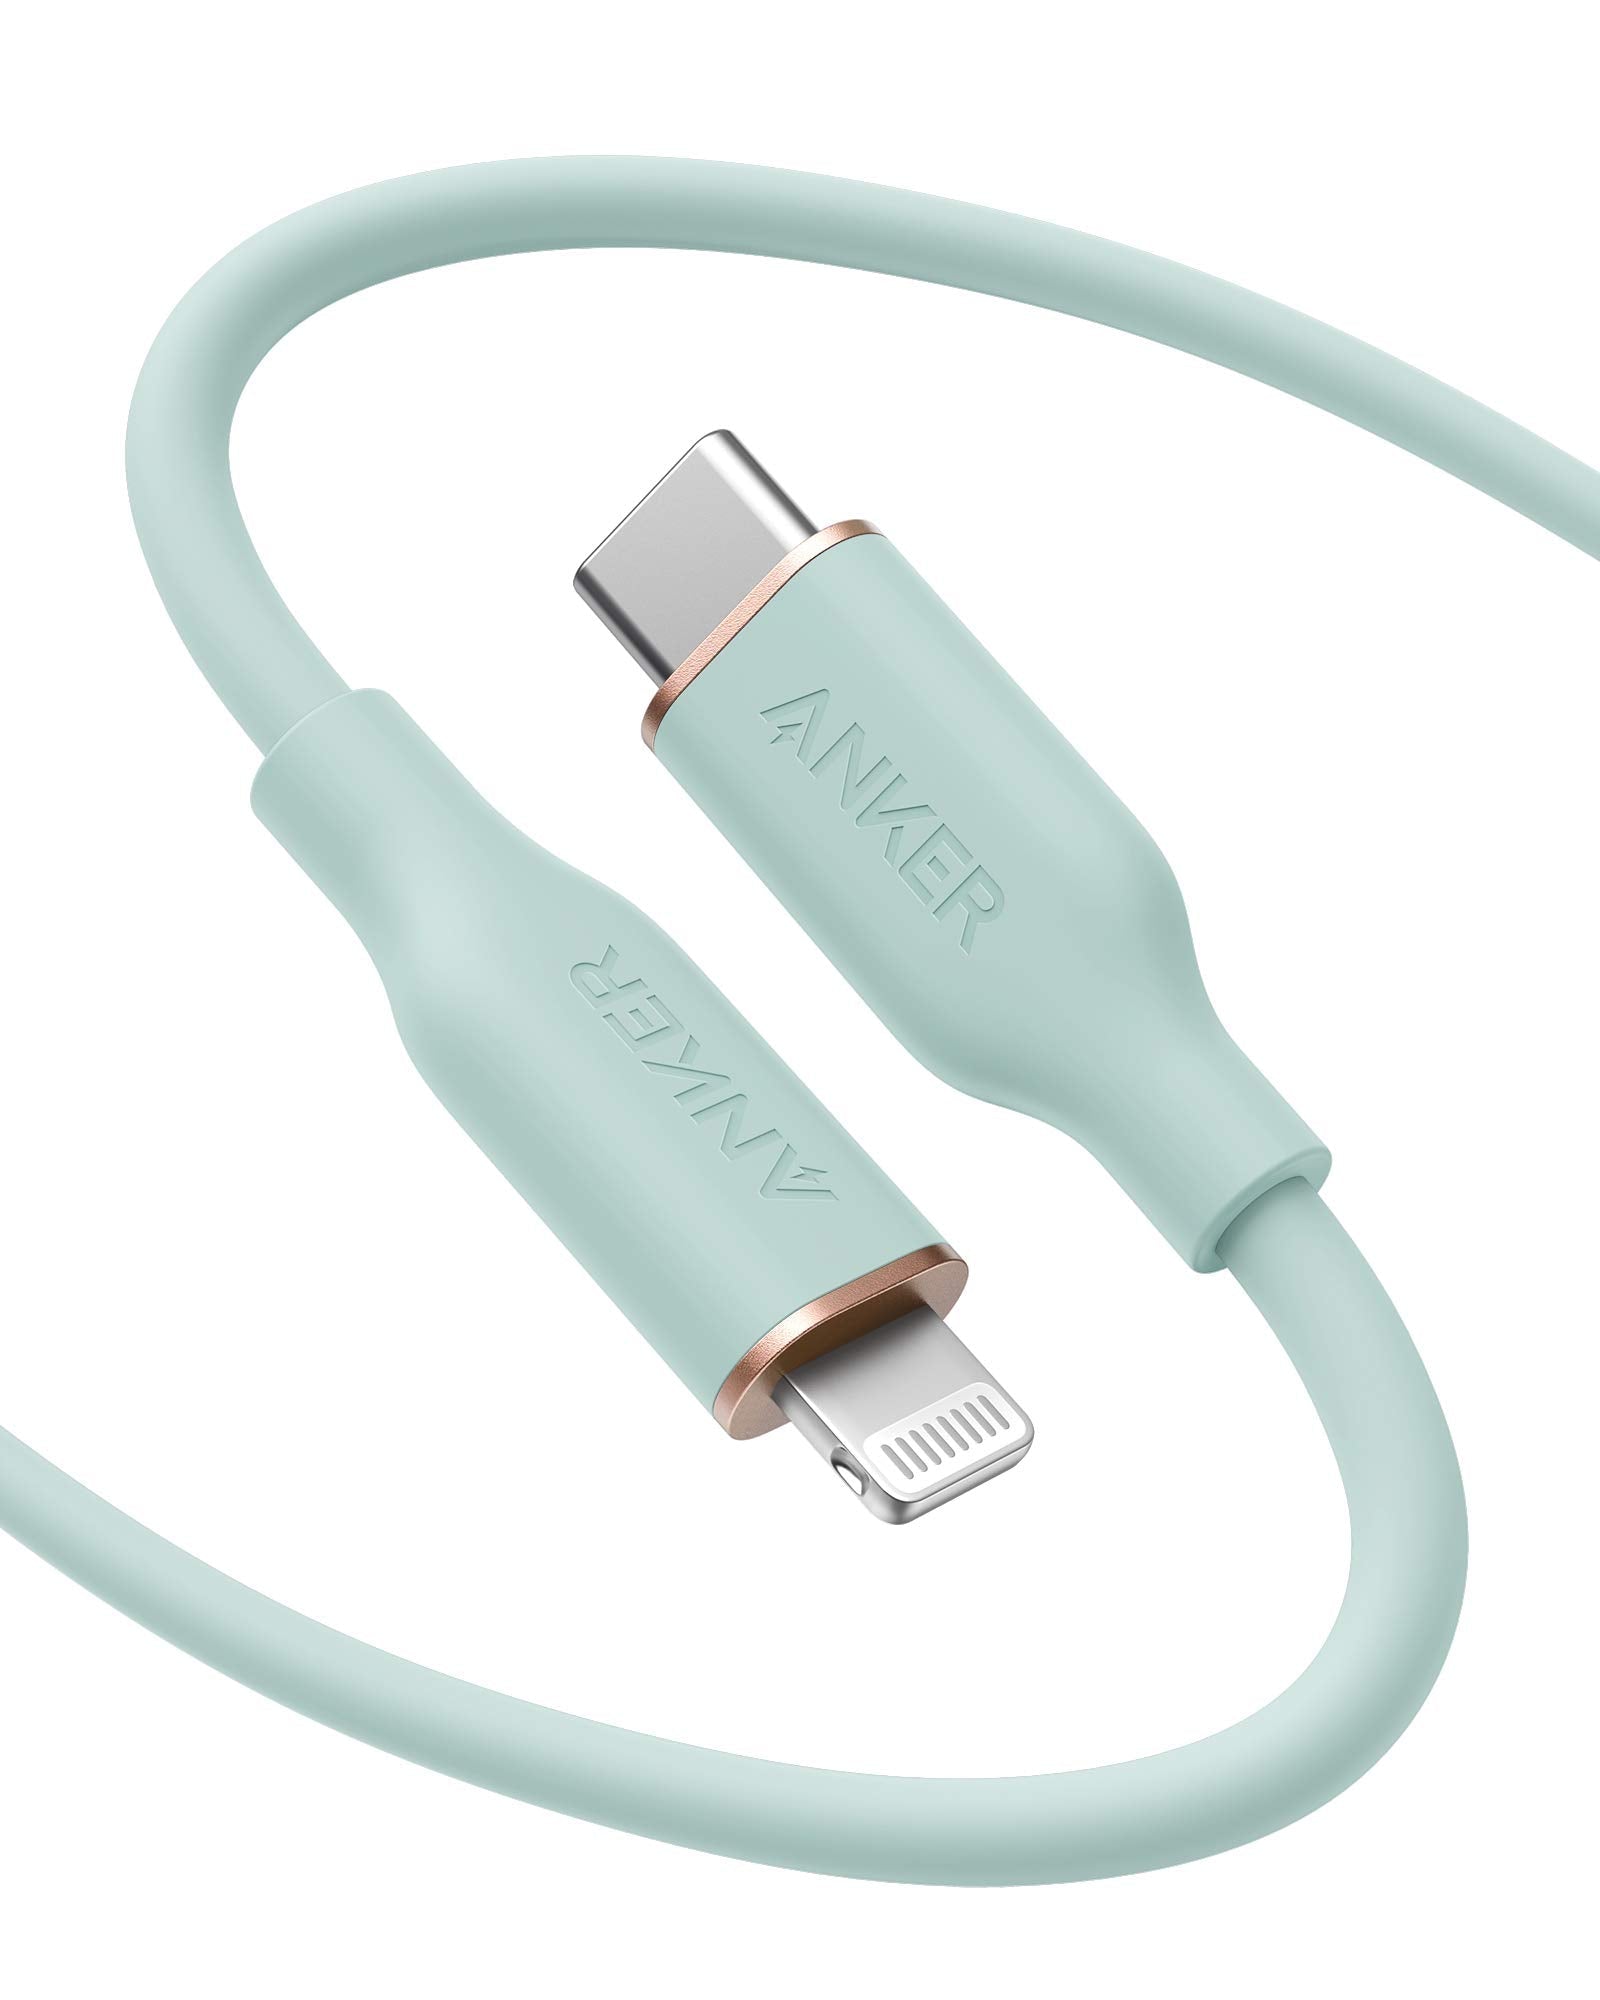 Anker 641 USB-C to Lightning Cable (Flow, Silicone) 6ft / Mint Green